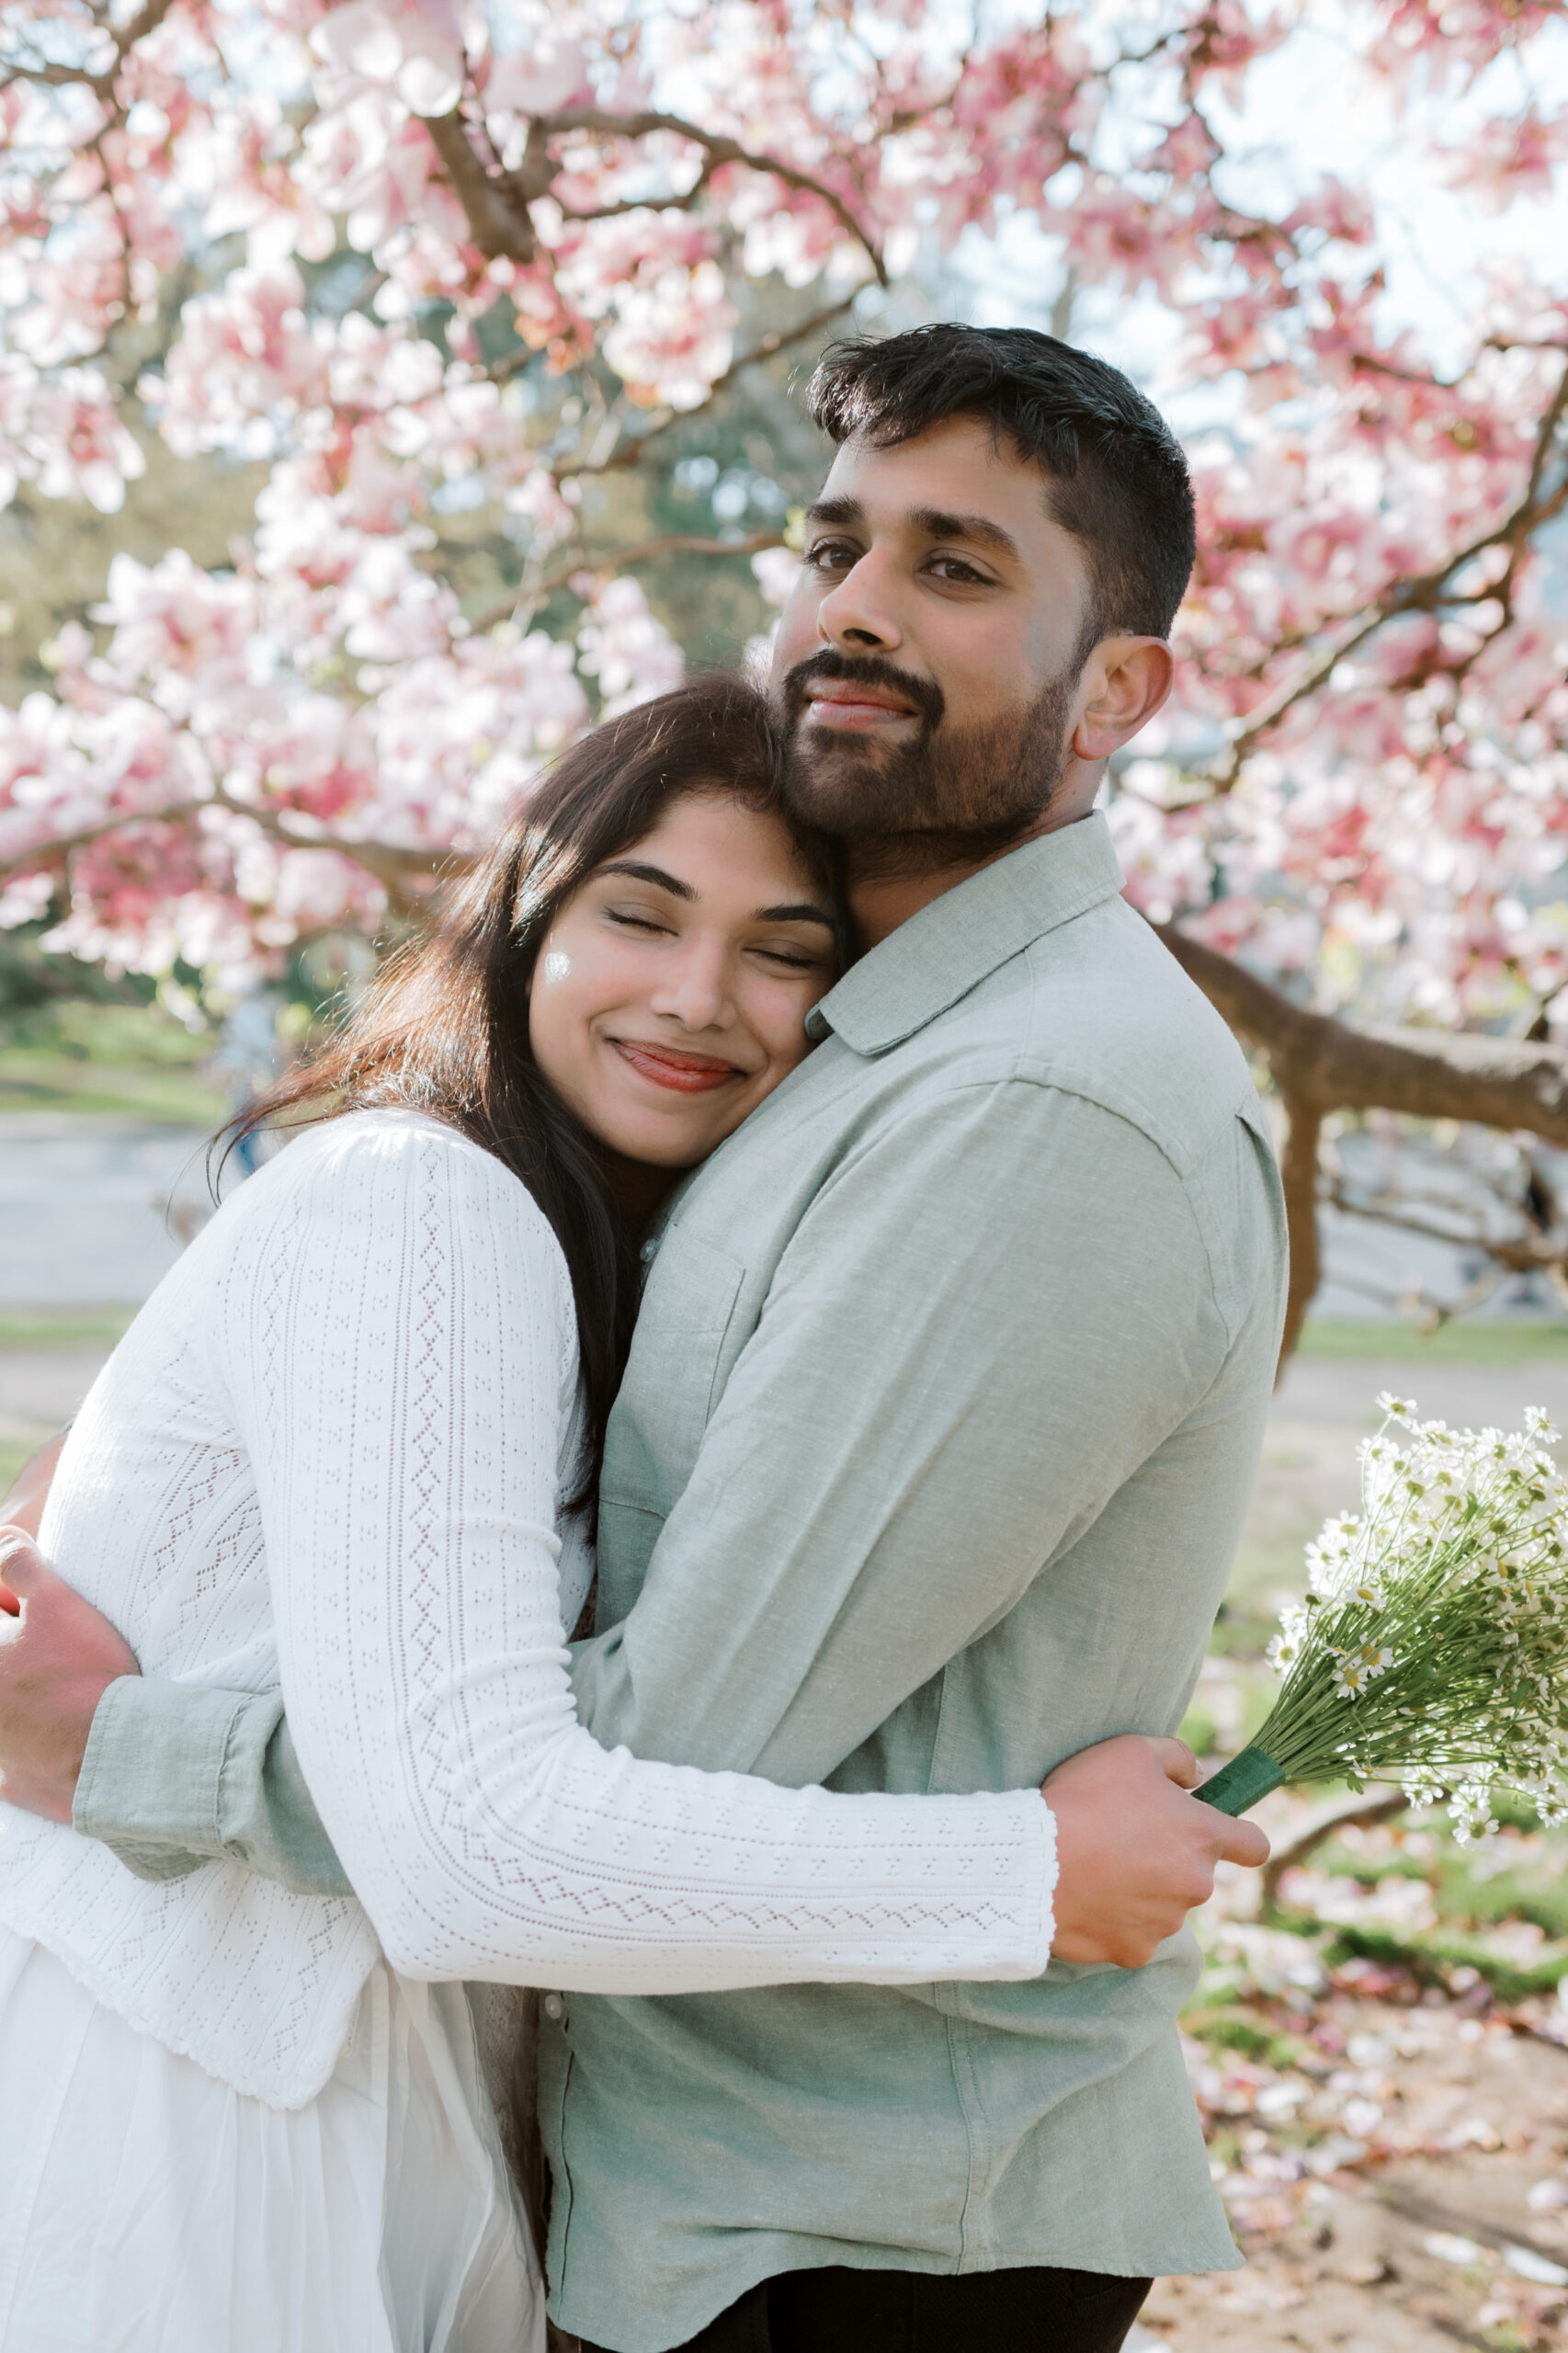 The engaged couple are happily hugging each other with a cherry blossom in the background. Image by Jenny Fu Studio